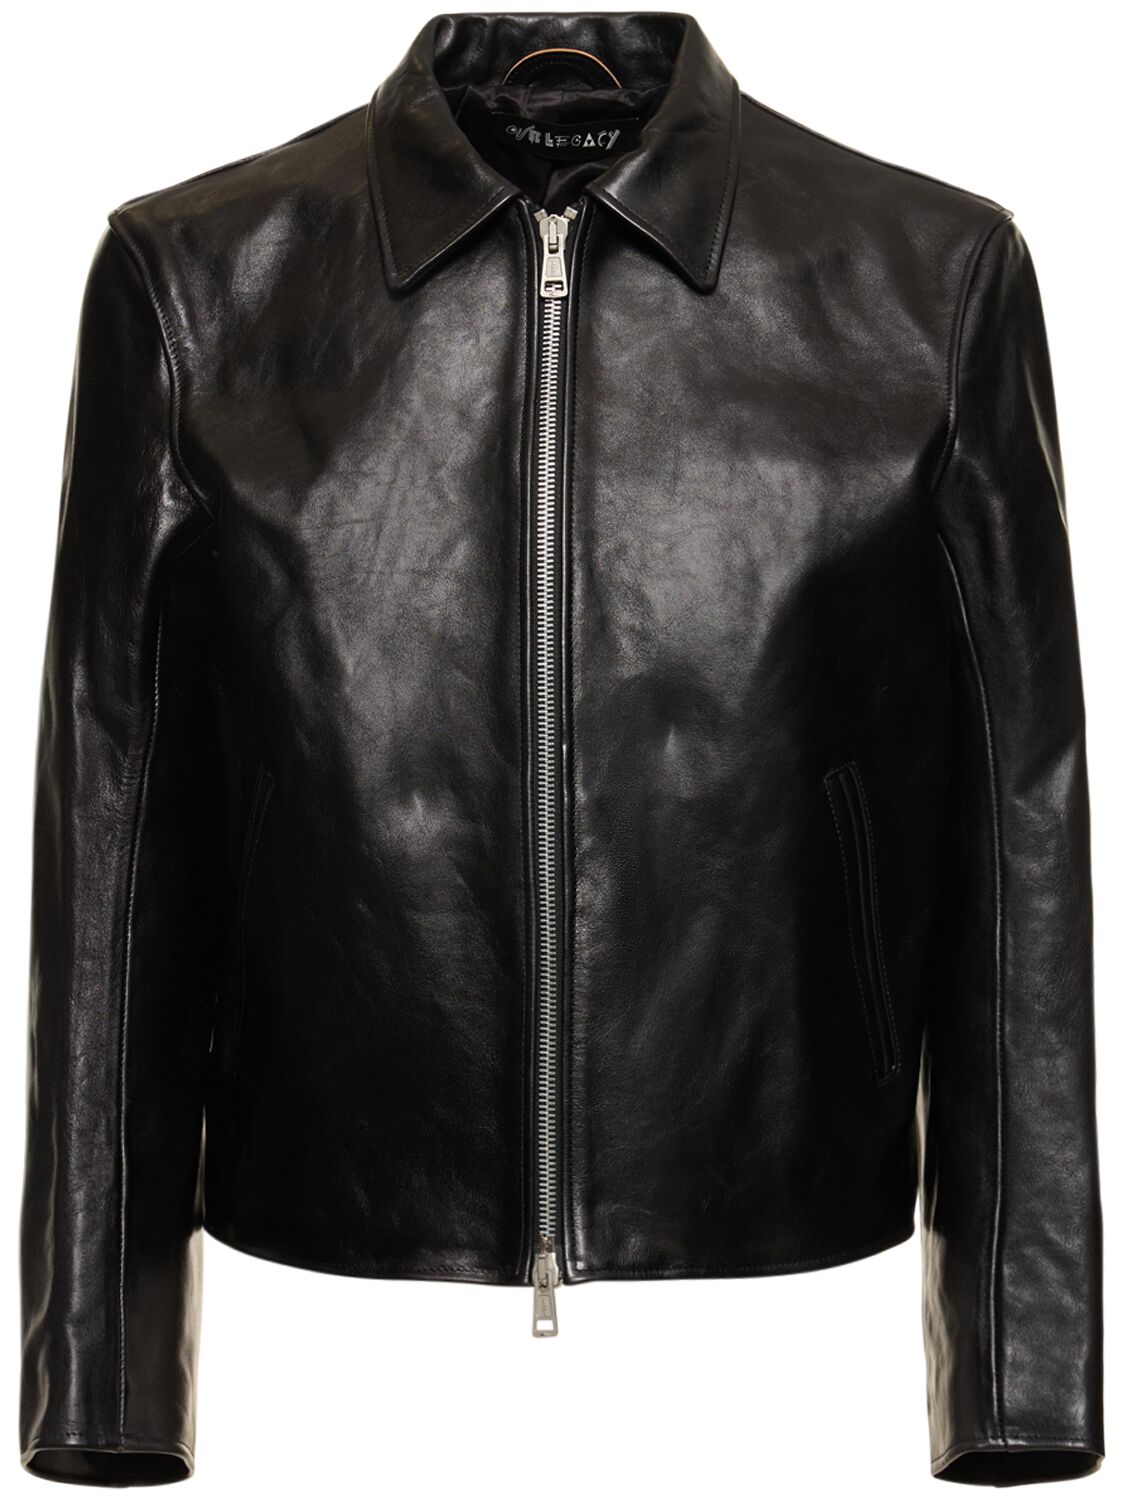 OUR LEGACY DYED LEATHER MOTO JACKET